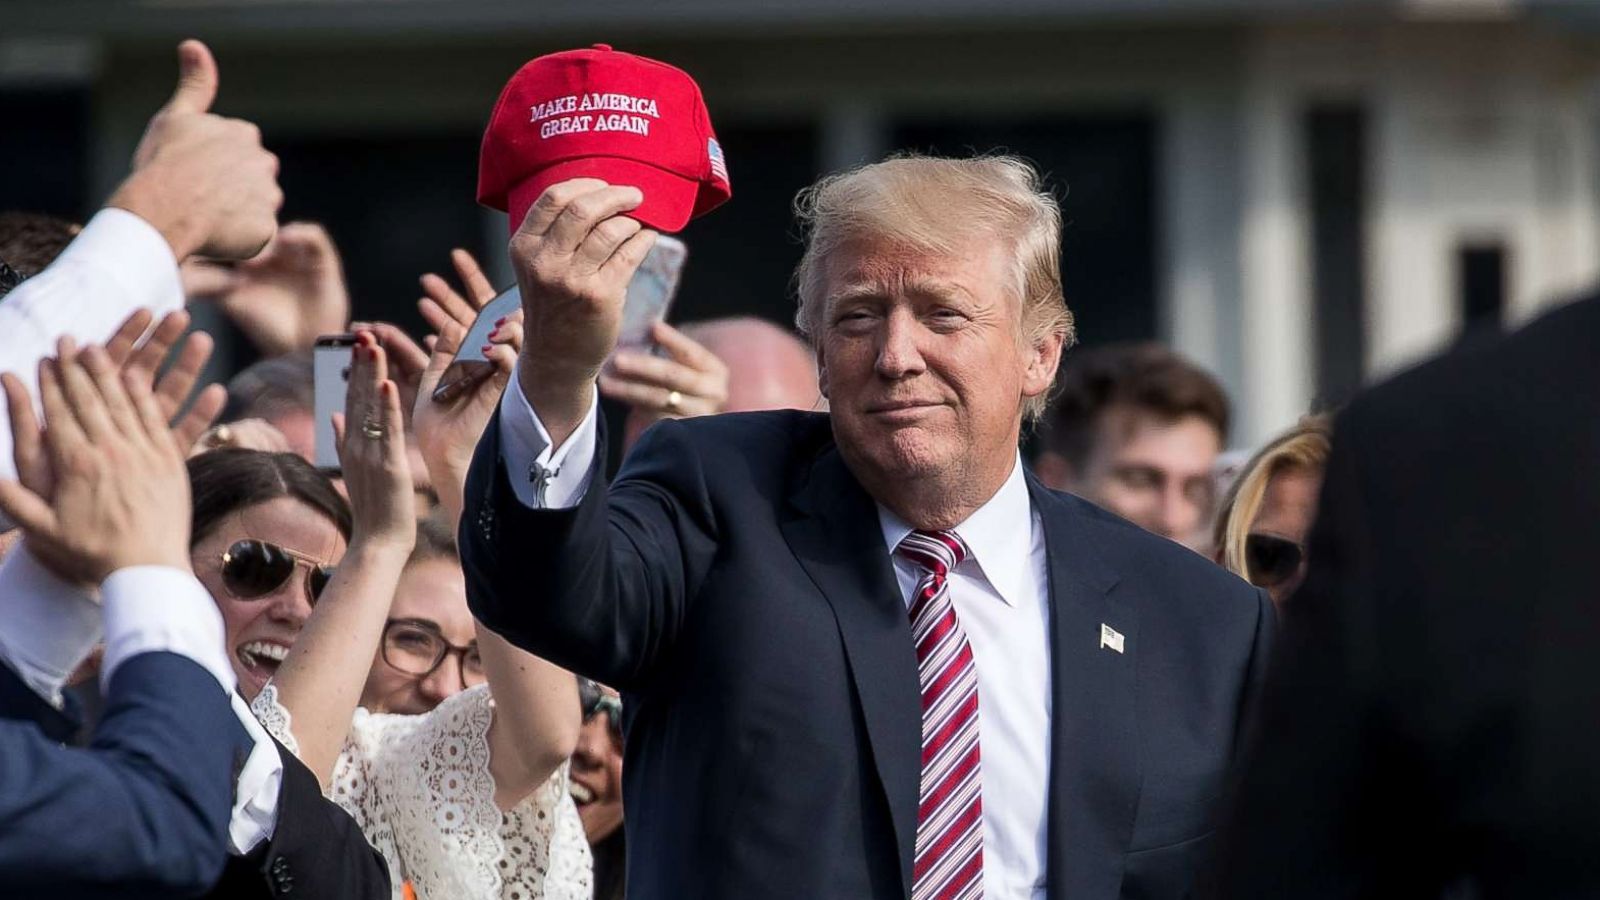 Make America Great Again' hats could double in price after new US